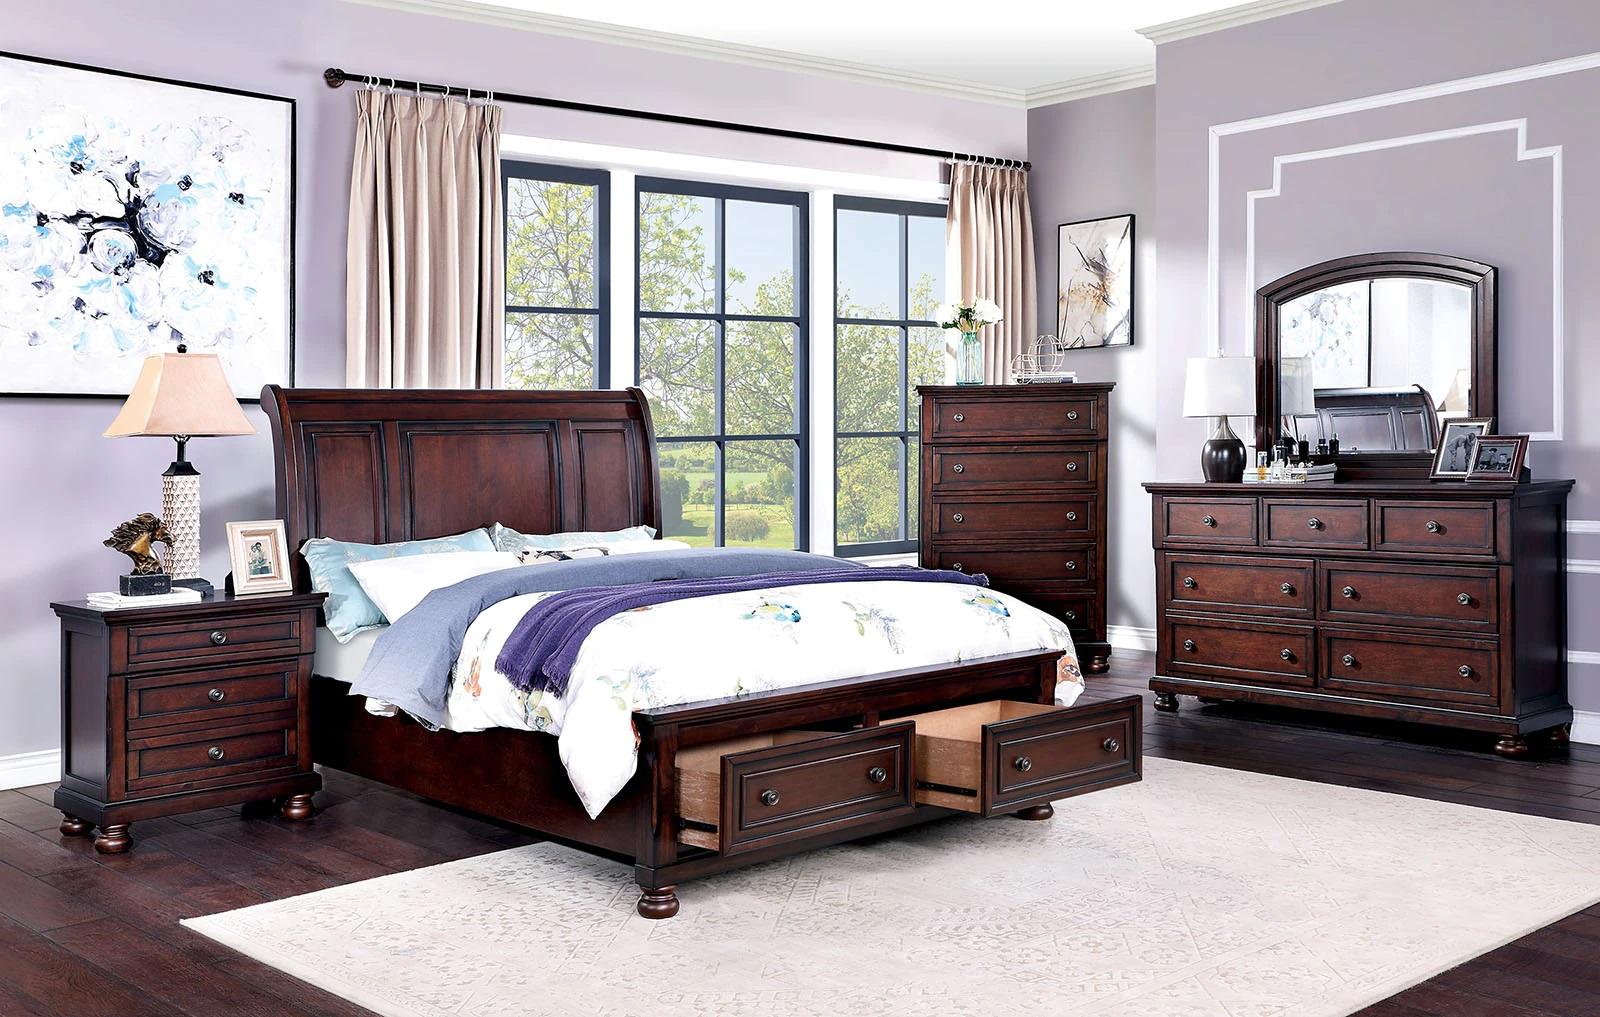 

    
Transitional Dark Cherry Solid Wood King Bedroom Set 6pcs Furniture of America CM7548CH-DR Wells
